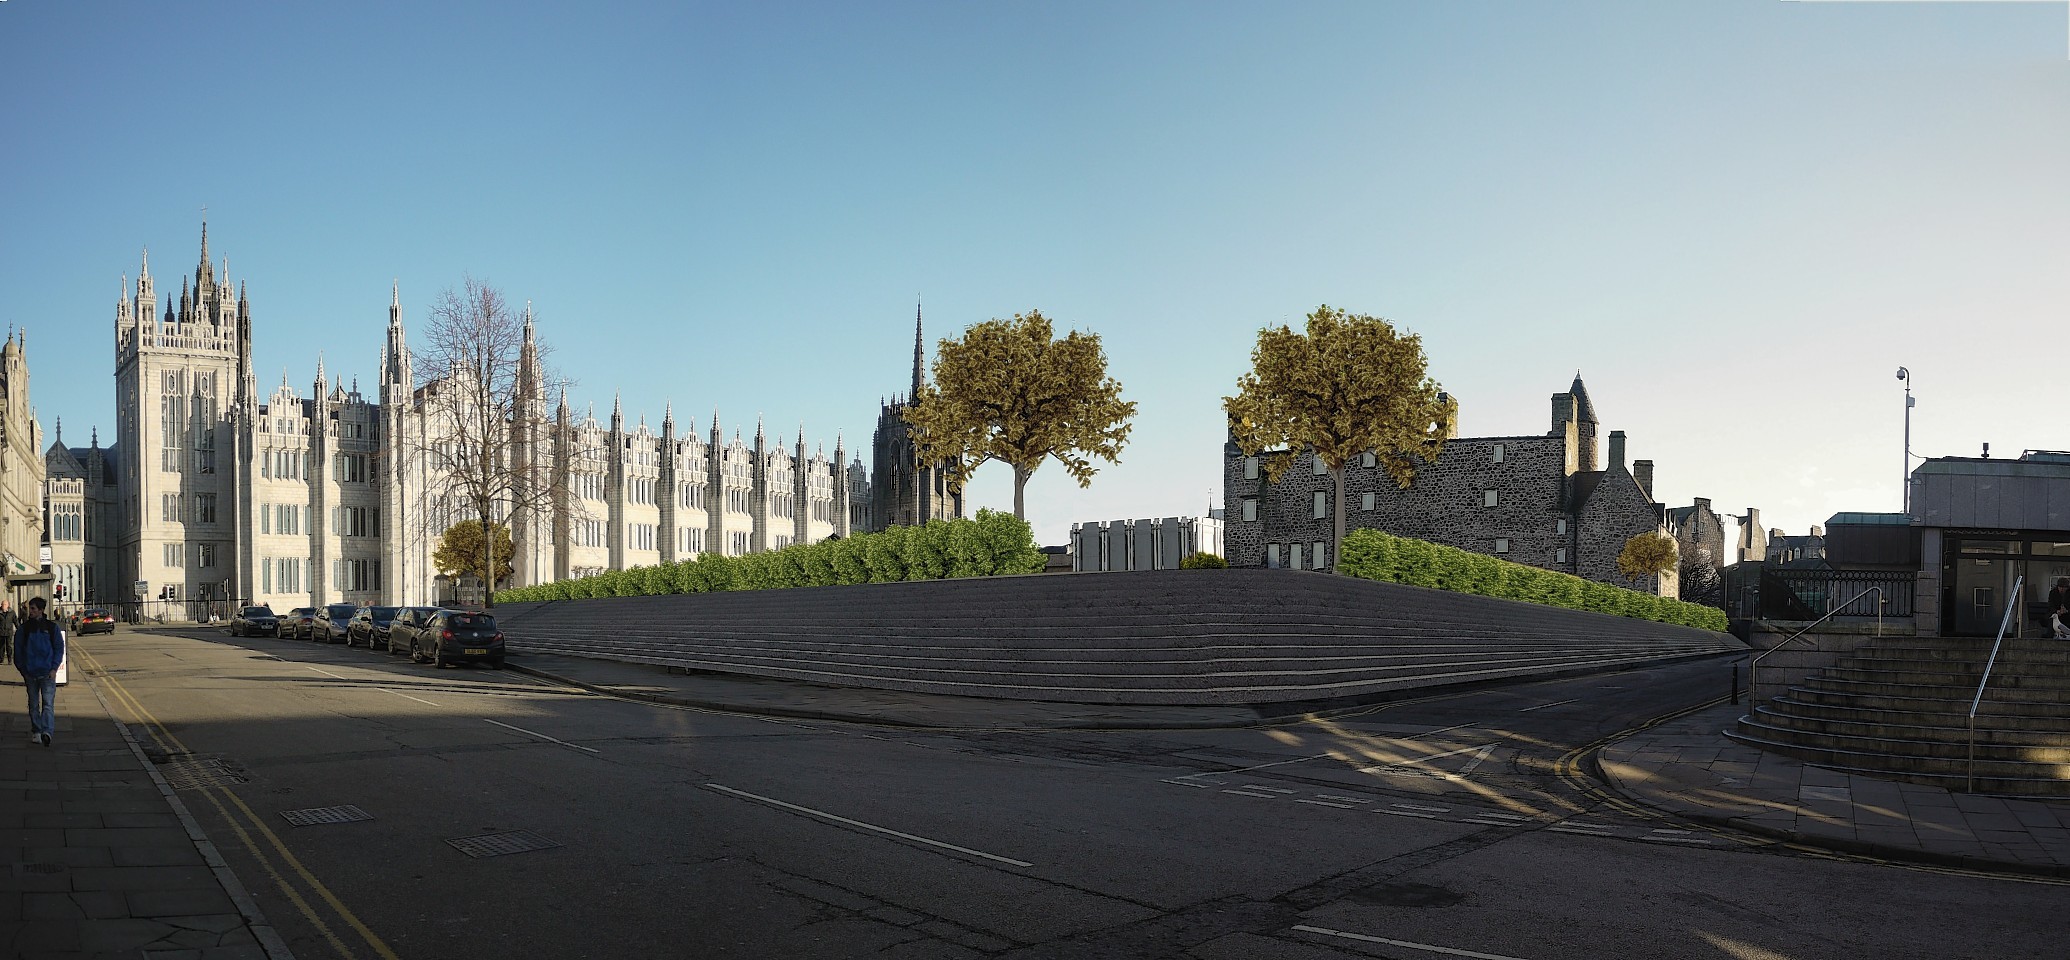 An alternative view, put forward by a campaigner, shows an open green area infront of Marischal College